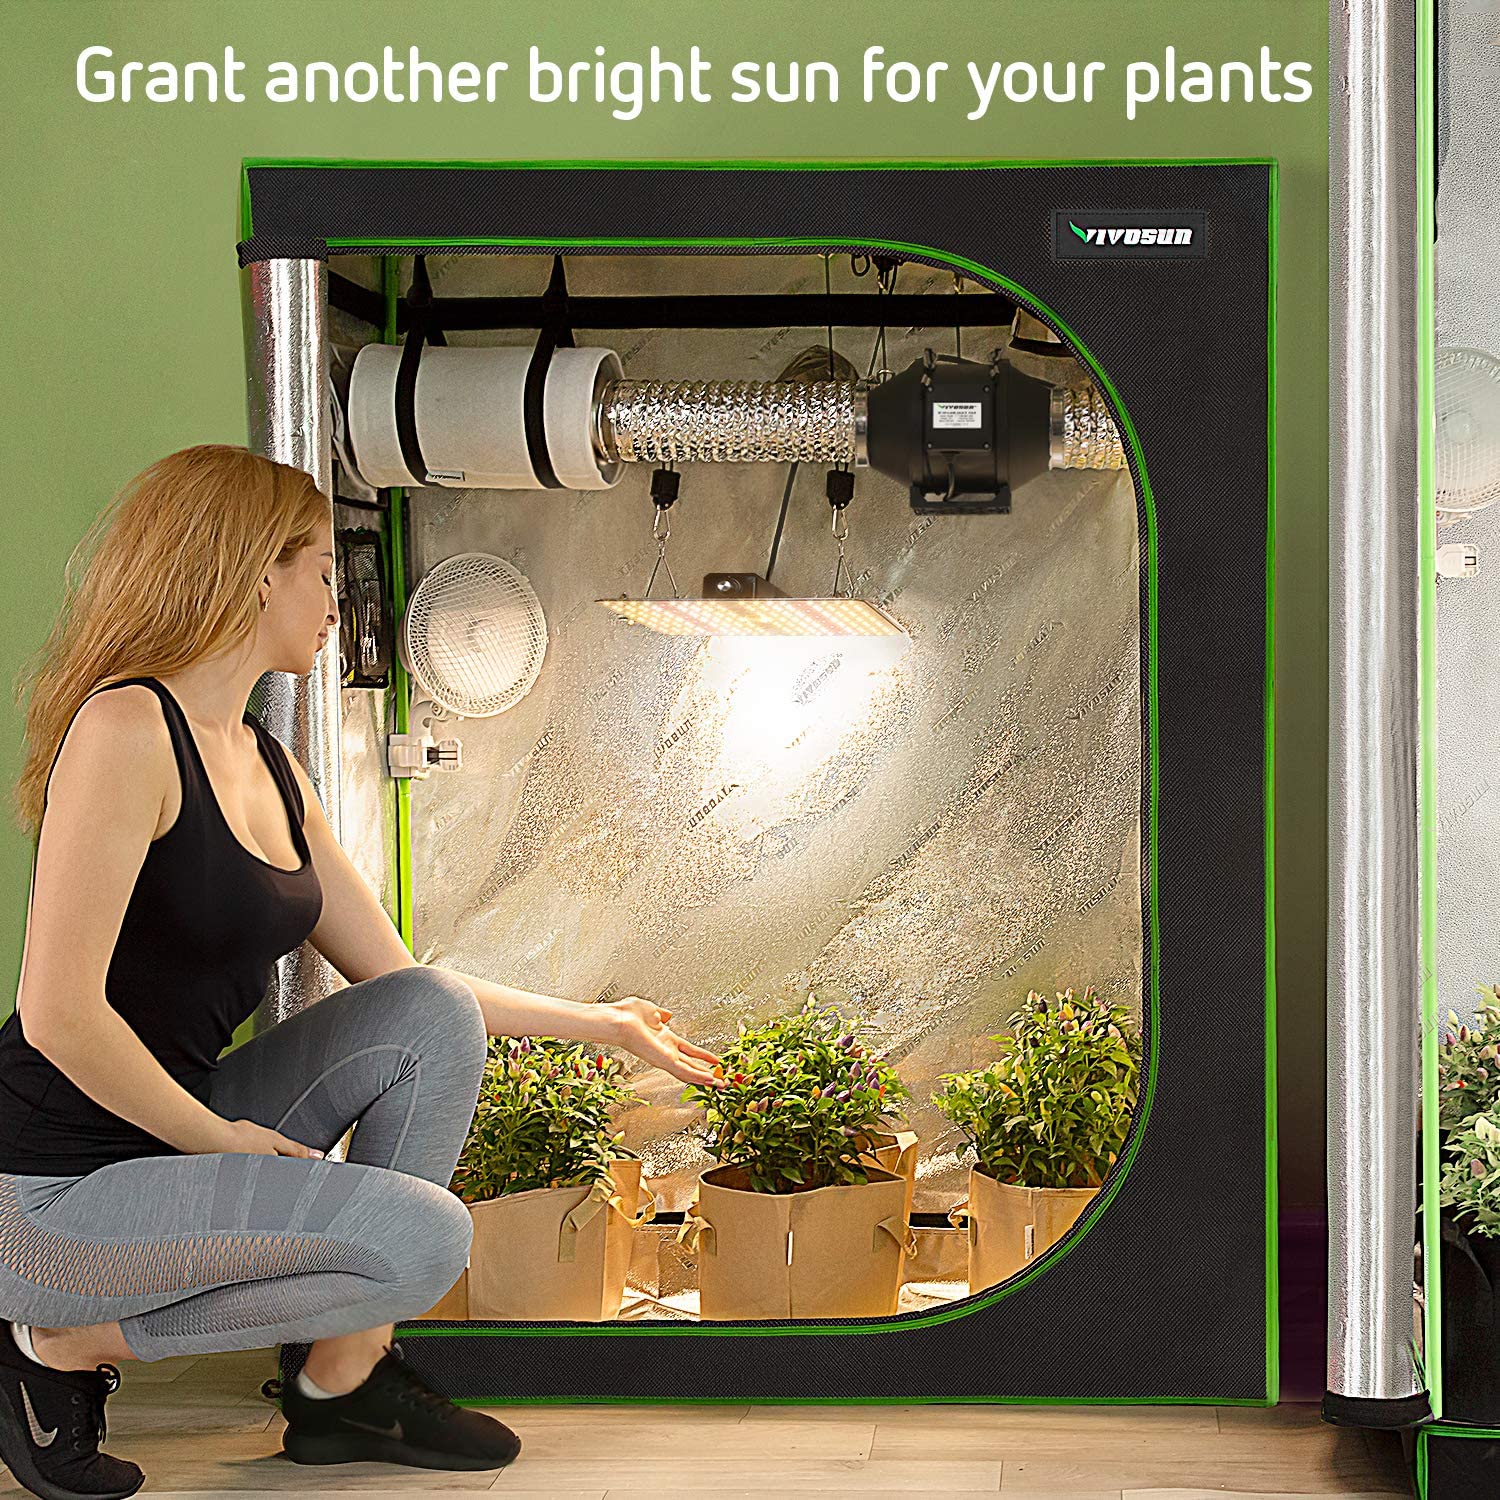 Details about   Hydroponic Grow Tent with Observation Window and Floor Tray Plant Growing  2'x4' 